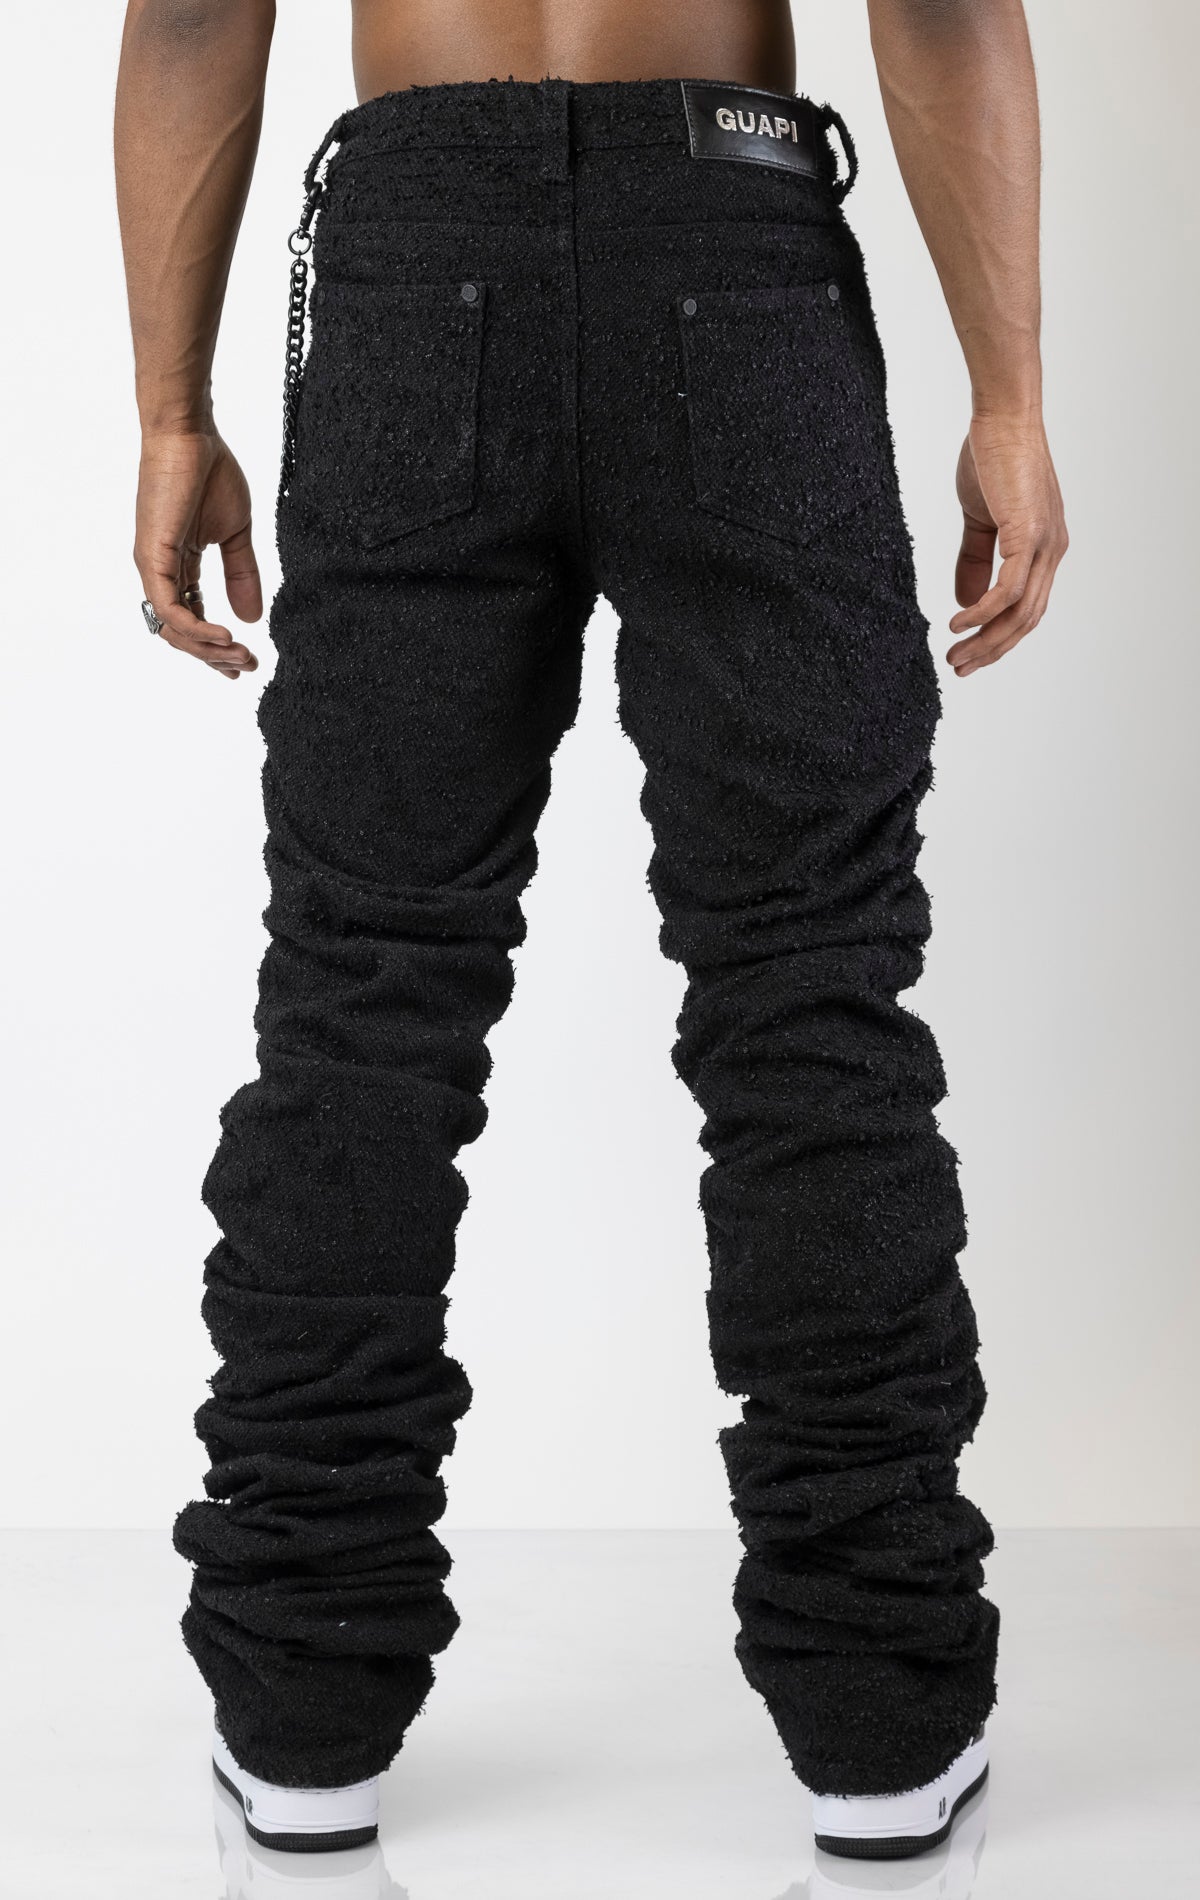 Men's jeans in a dark wash with a unique stacked design that starts from the thigh. The jeans taper at the ankle for a slim fit and feature custom hardware. Made from a blend of 80% cotton and 20% polyester. 